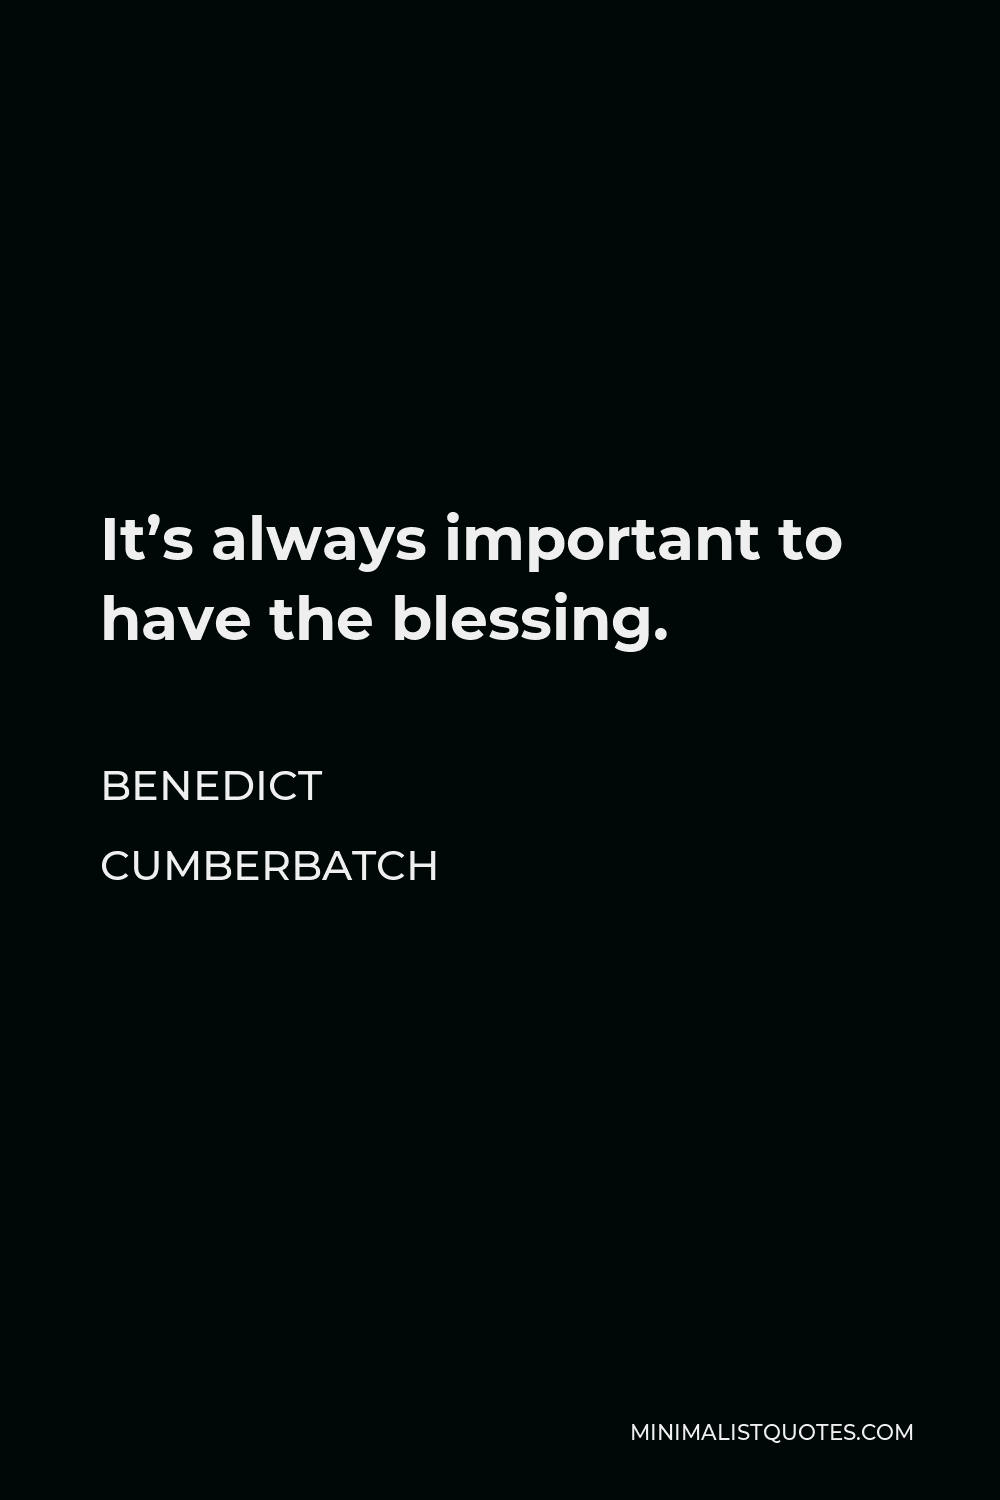 Benedict Cumberbatch Quote - It’s always important to have the blessing.